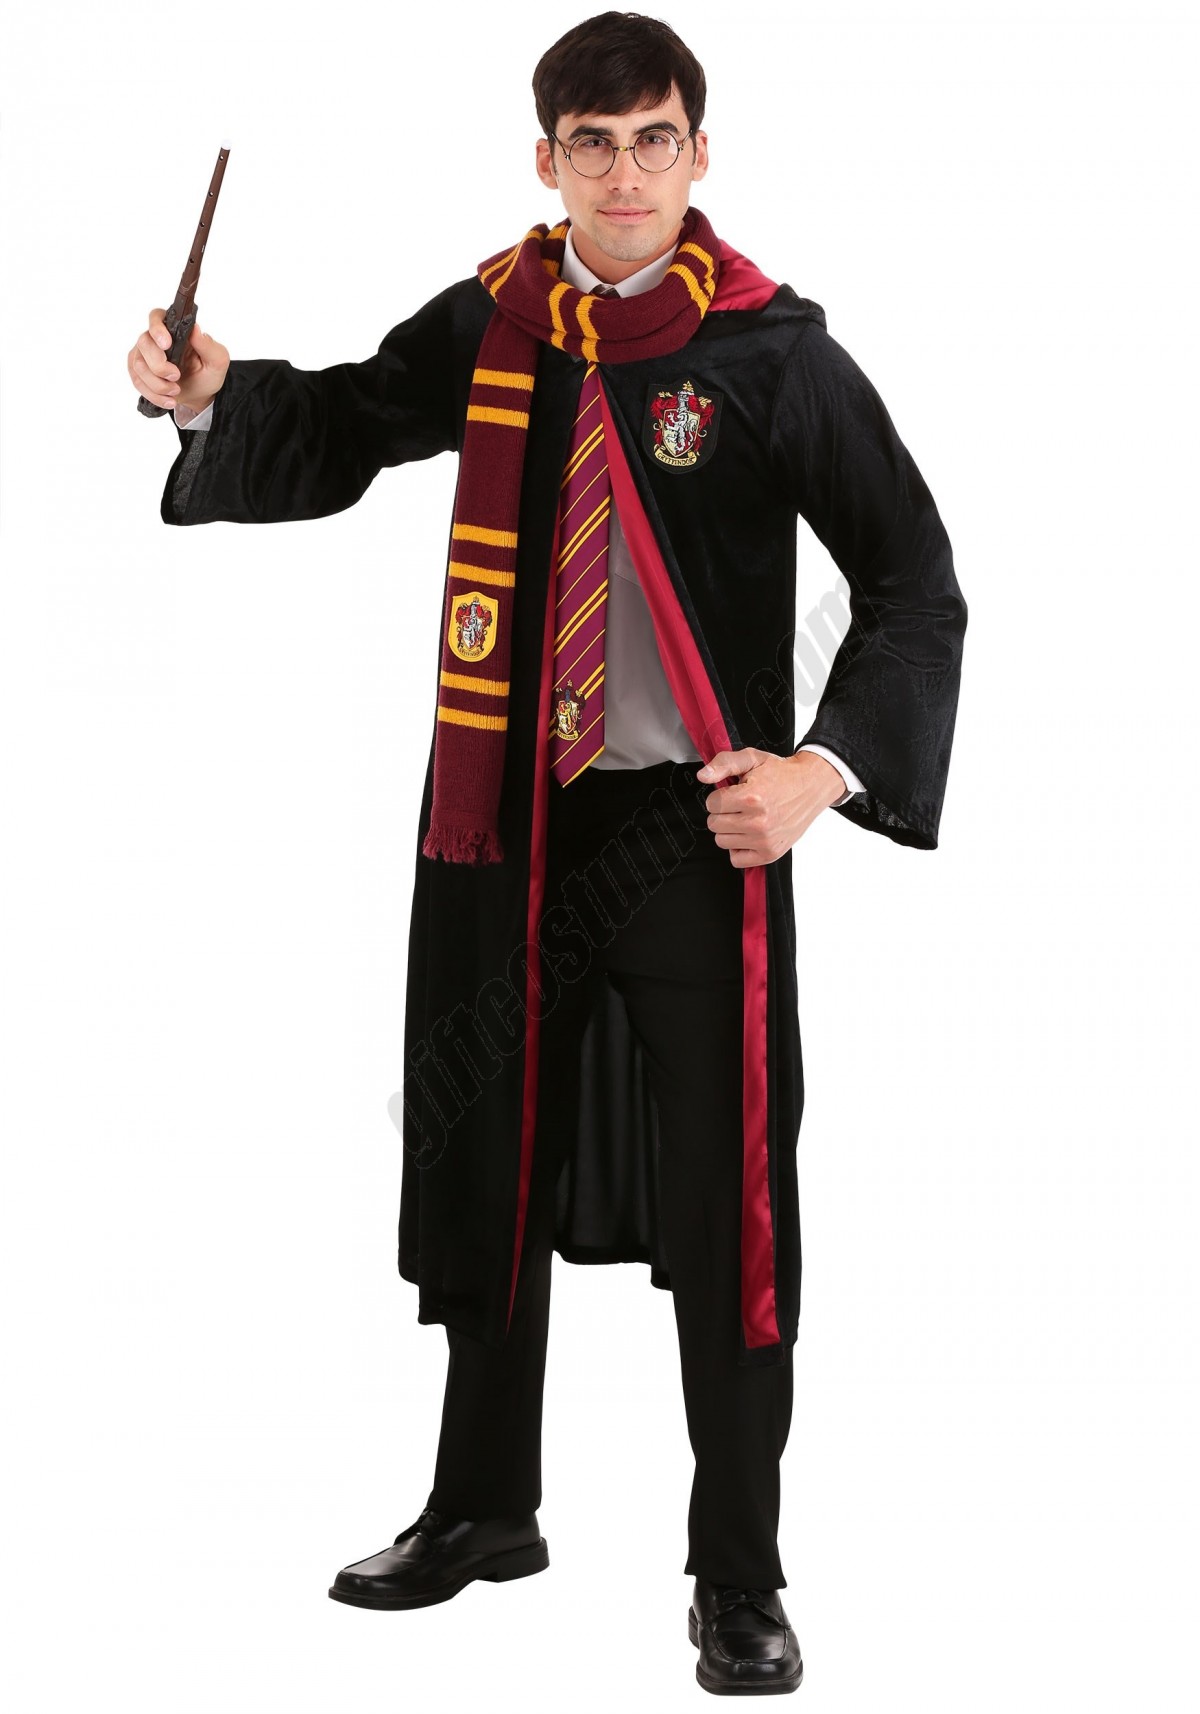 Harry Potter Adult Deluxe Gryffindor Robe Costume Promotions - -2